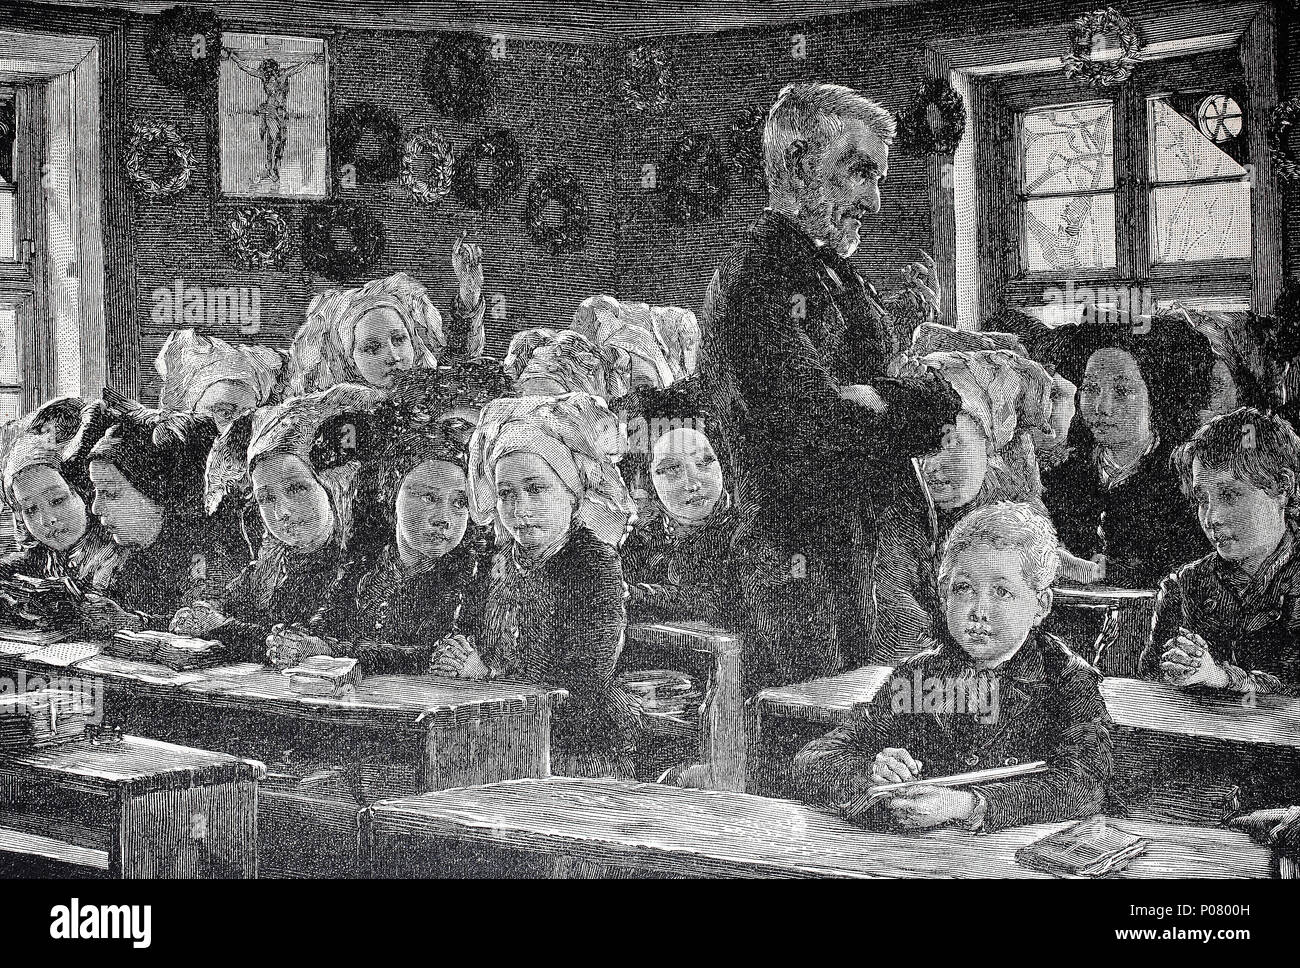 A school in the Lausitz, Upper Sorbian aera, Germany. Wendische Schule, Lausitz, Klassenzimmer, digital improved reproduction of an original print from the year 1881 Stock Photo